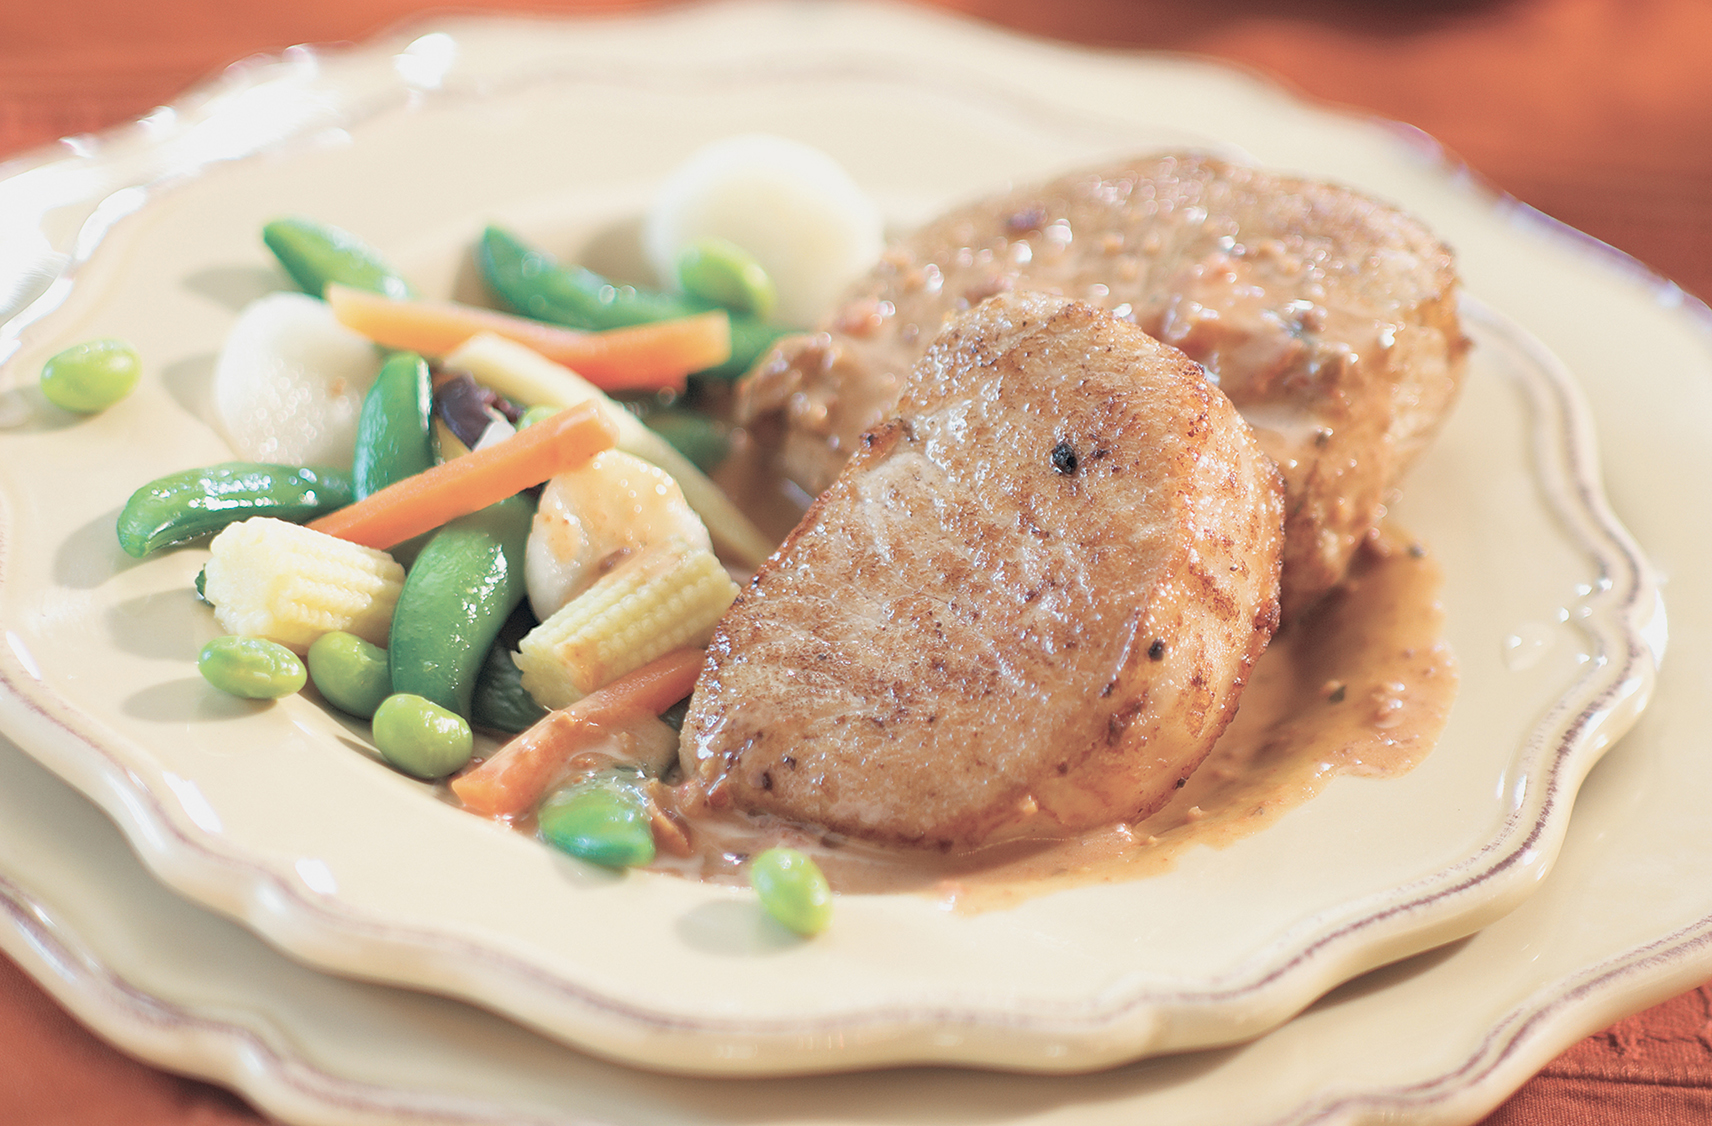 two pieces of saucy szechwan pork chops served on a cream coloured plate with steam mixed vegetables on the side